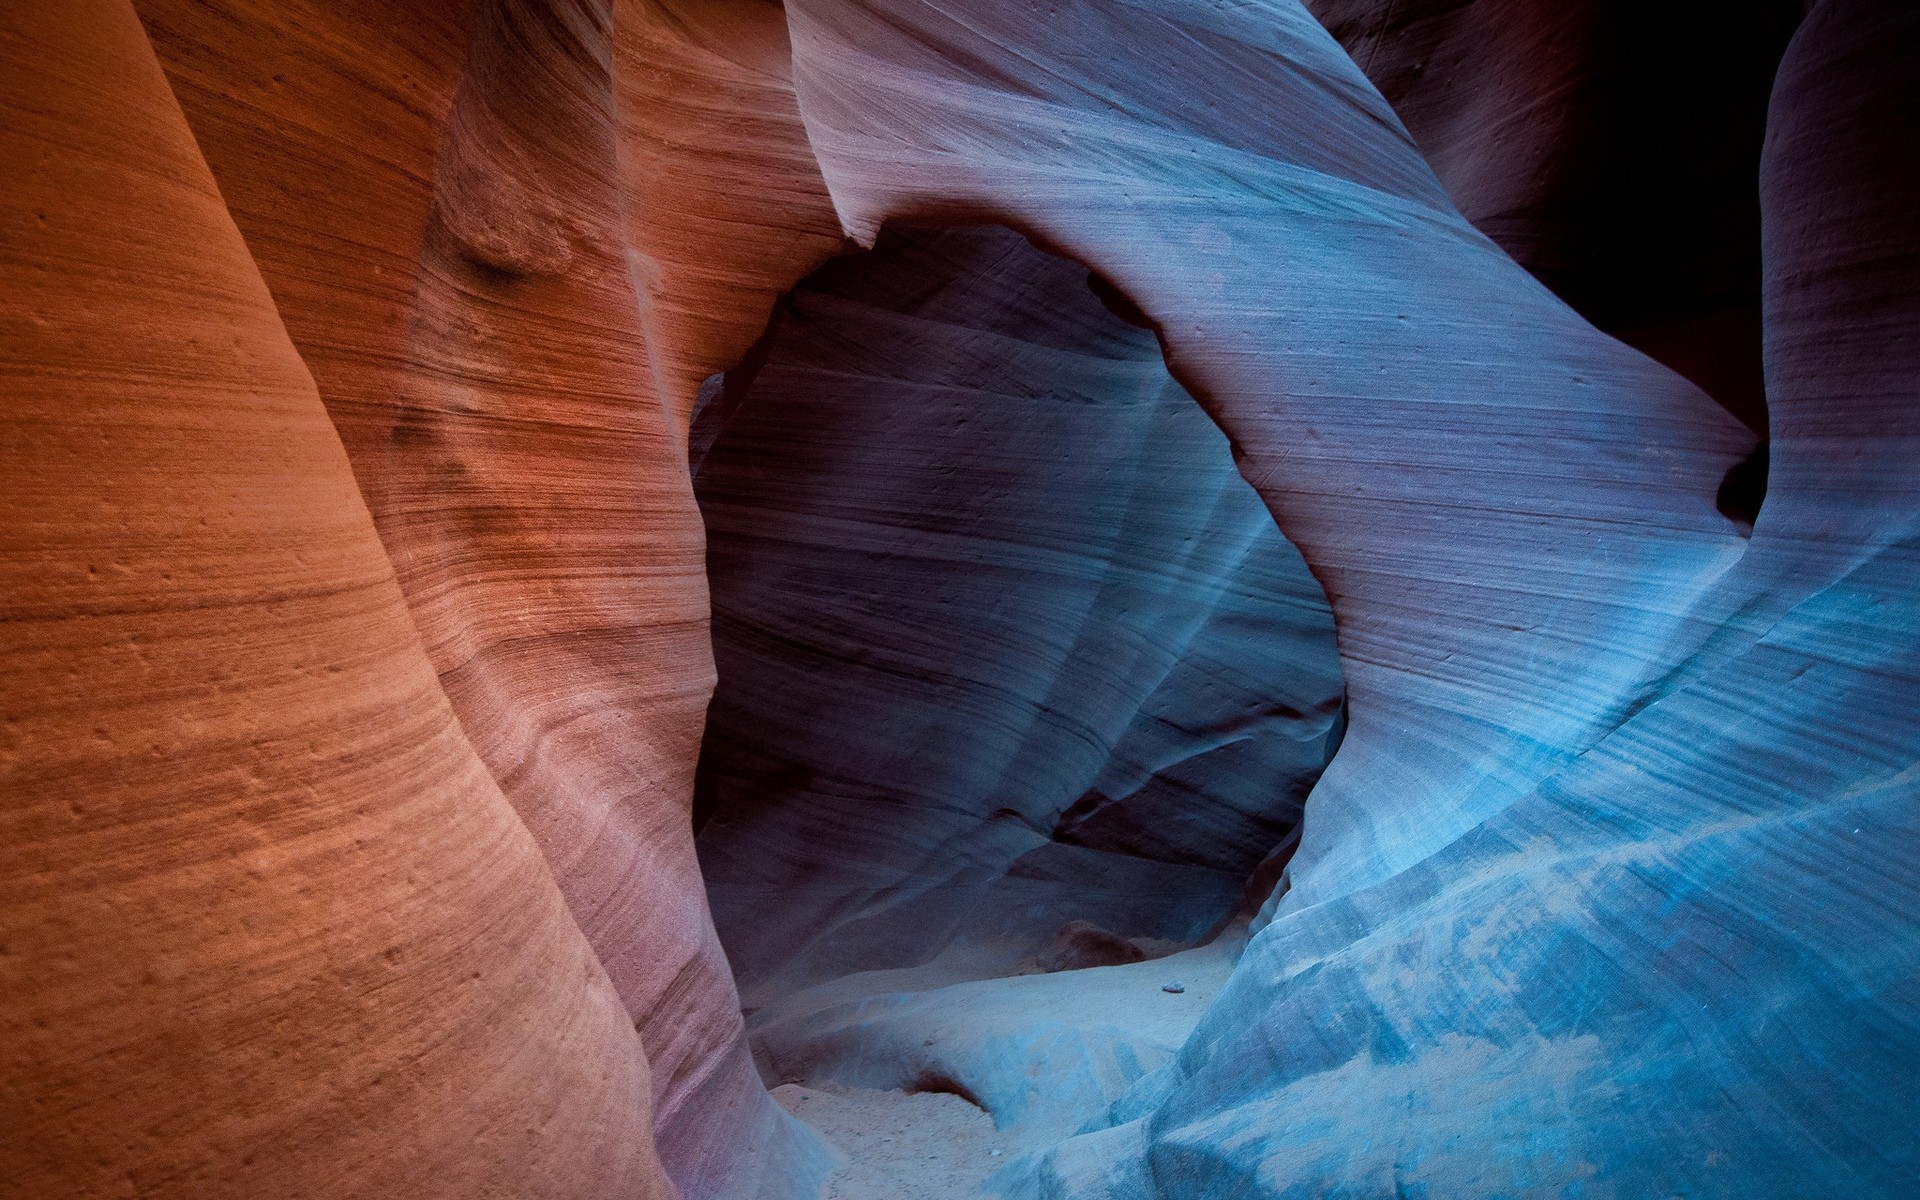 united states antelope canyon texture sandstone nature abstract art erosion page travel desert geology color slot pattern landscape sand rock canyon pics canyon background